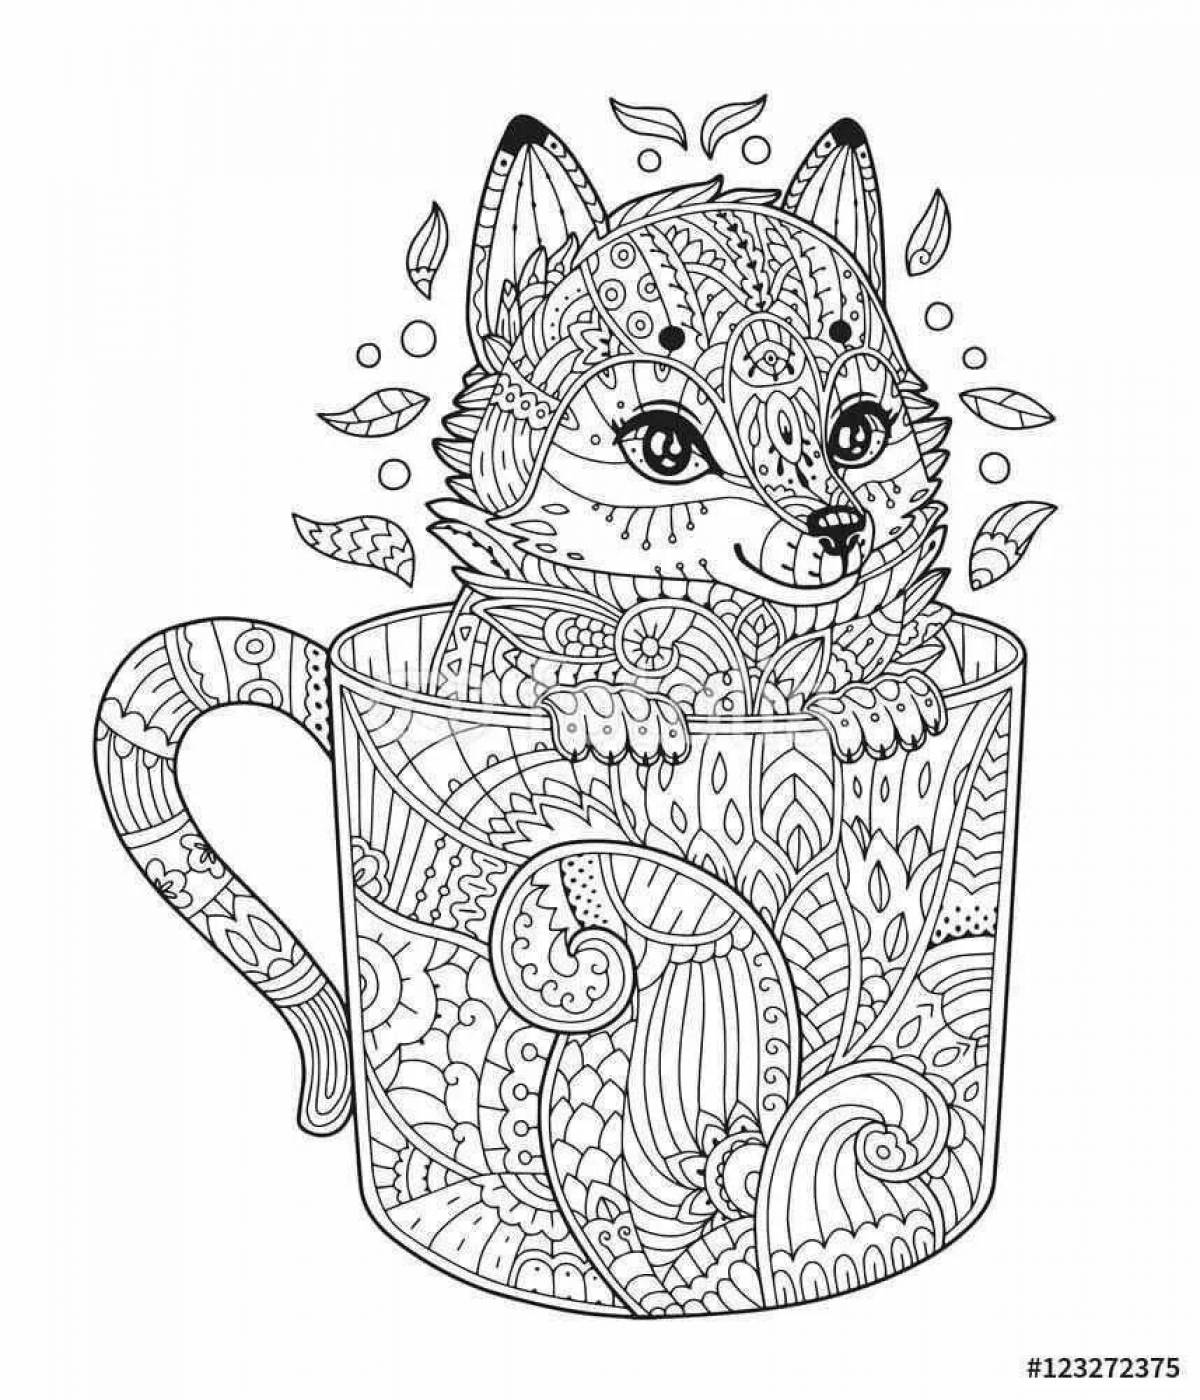 Dazzling fox coloring book for adults